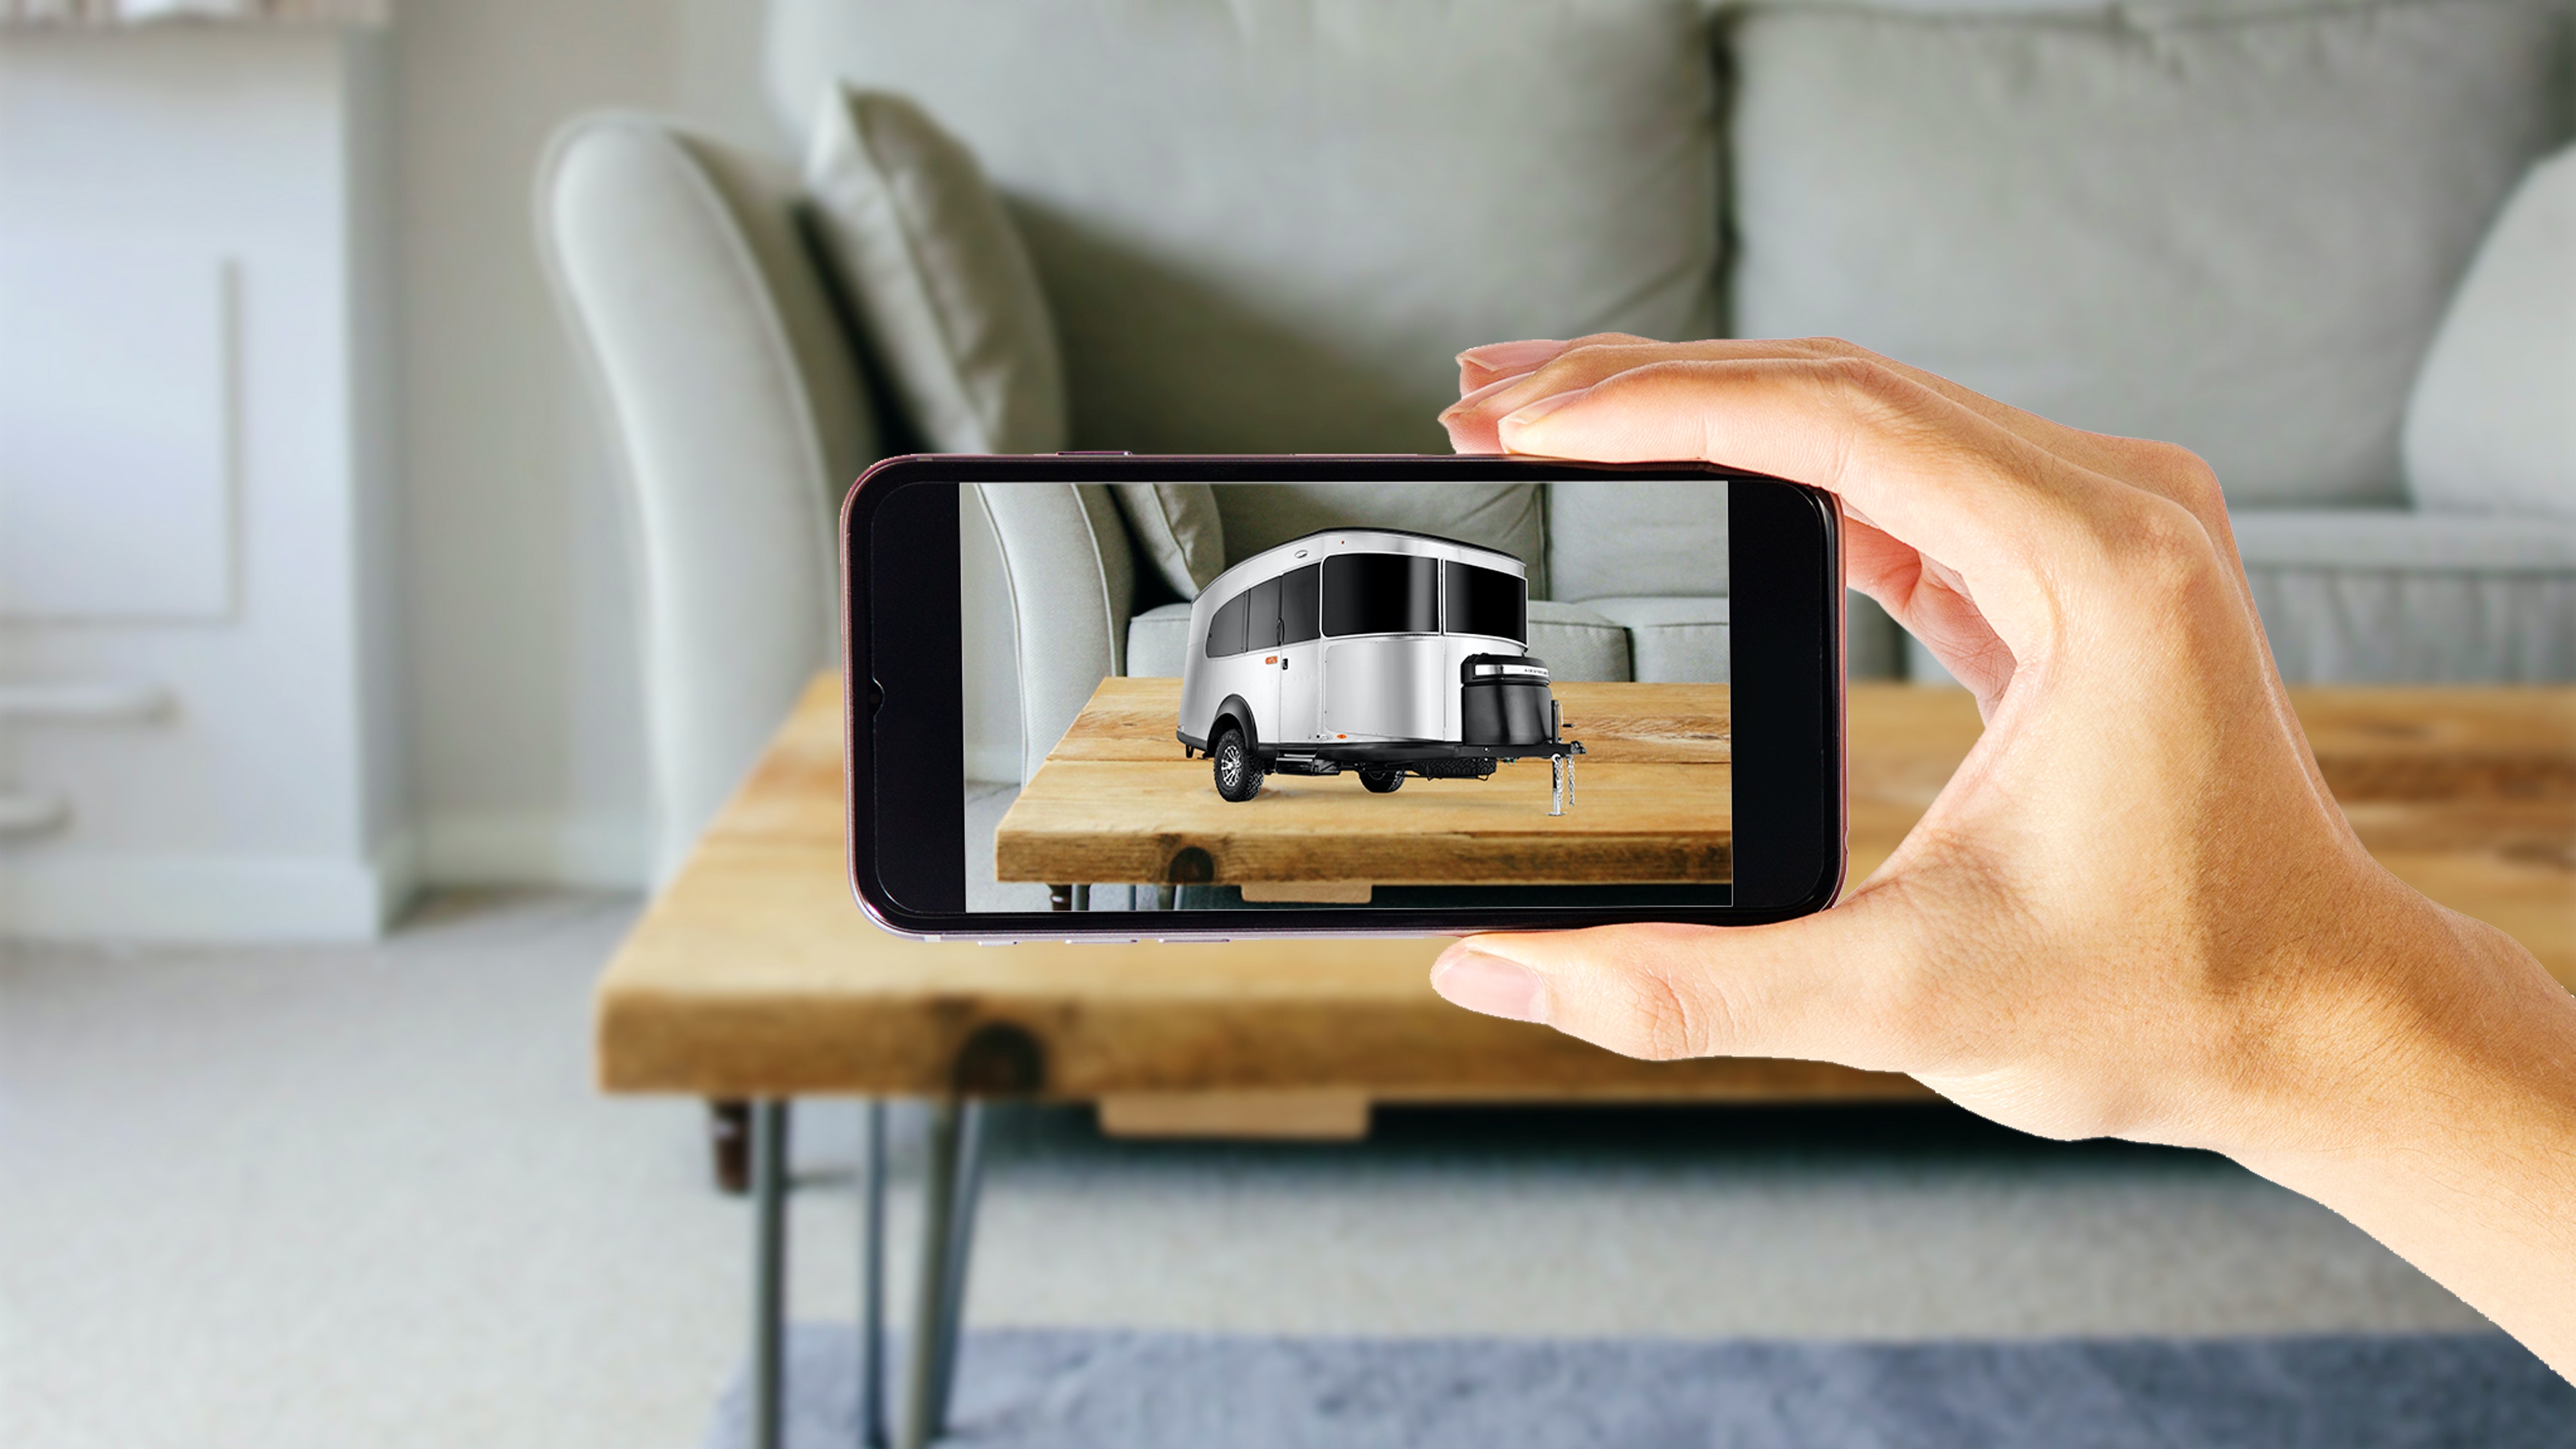 Plan your next outdoor adventure in style with Airstream’s augmented reality experience